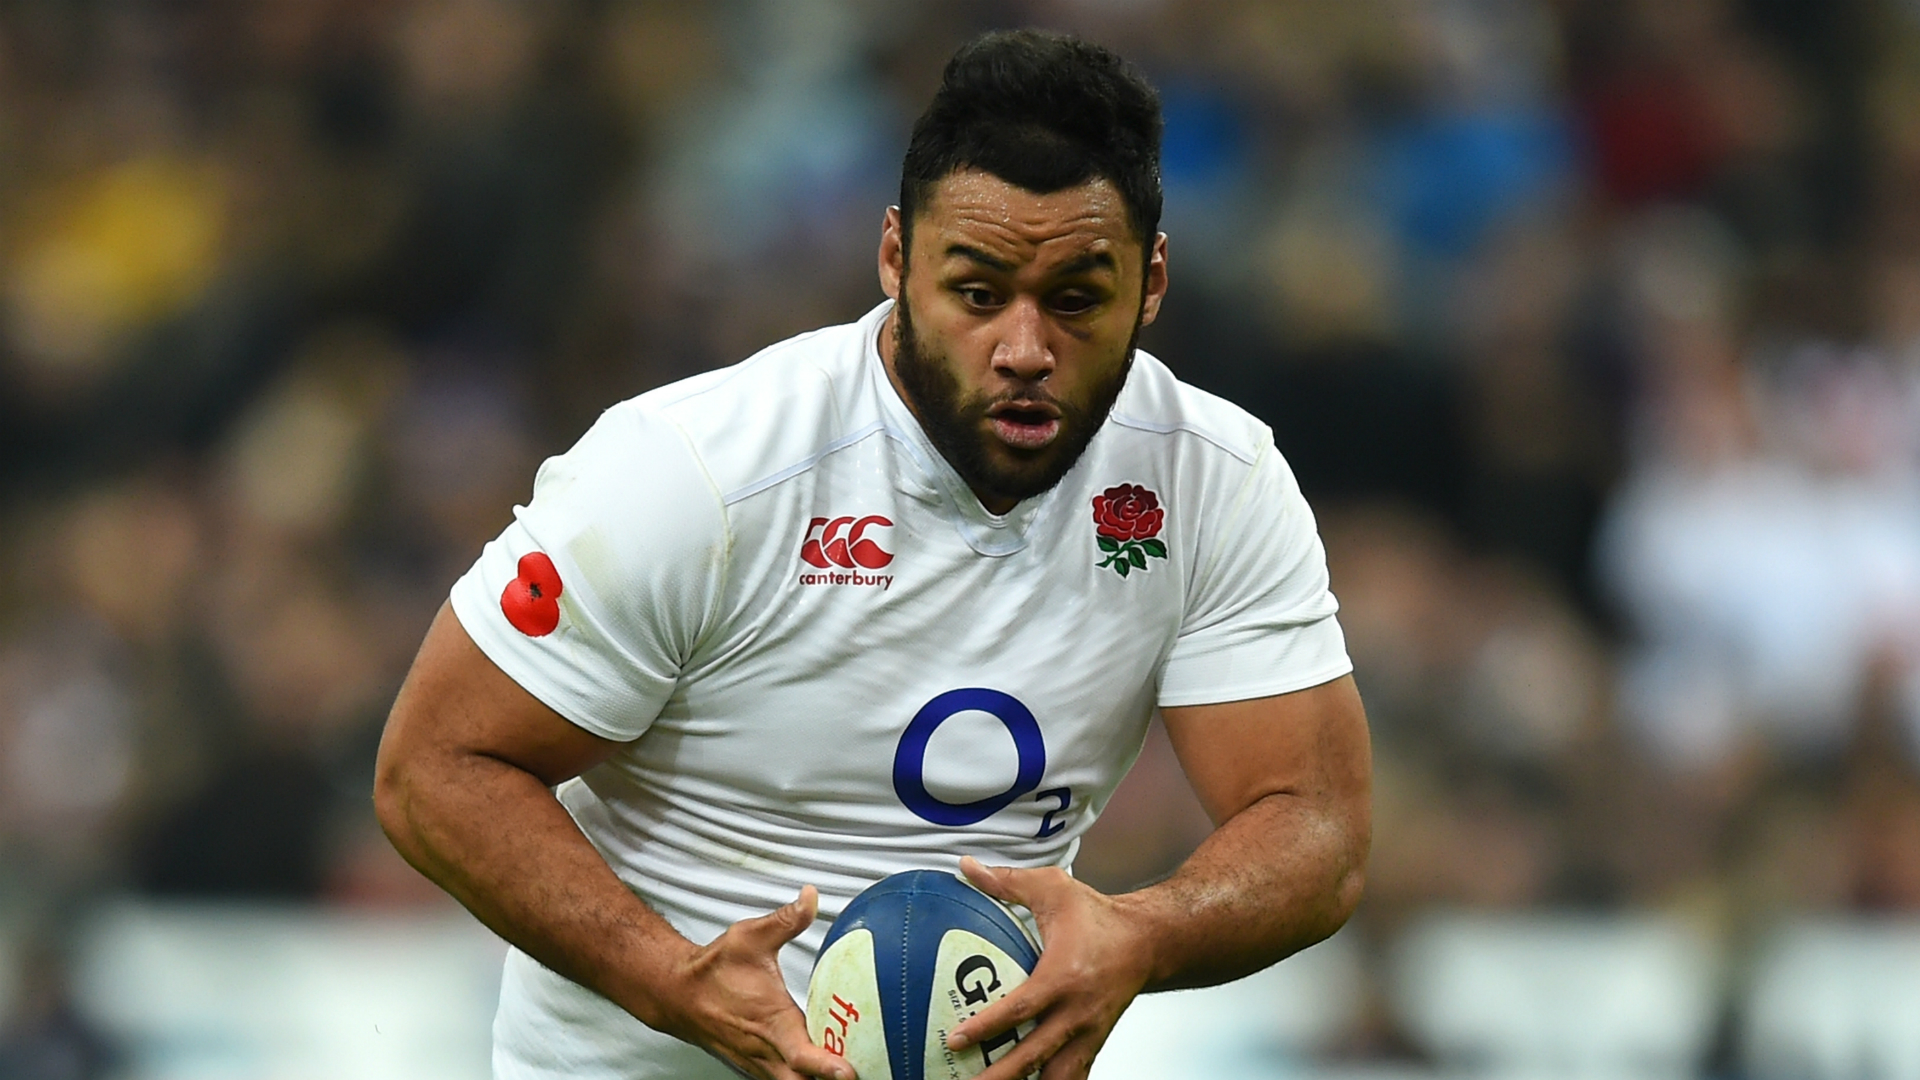 Rugby | England star Vunipola named Player of the Year | SPORTAL